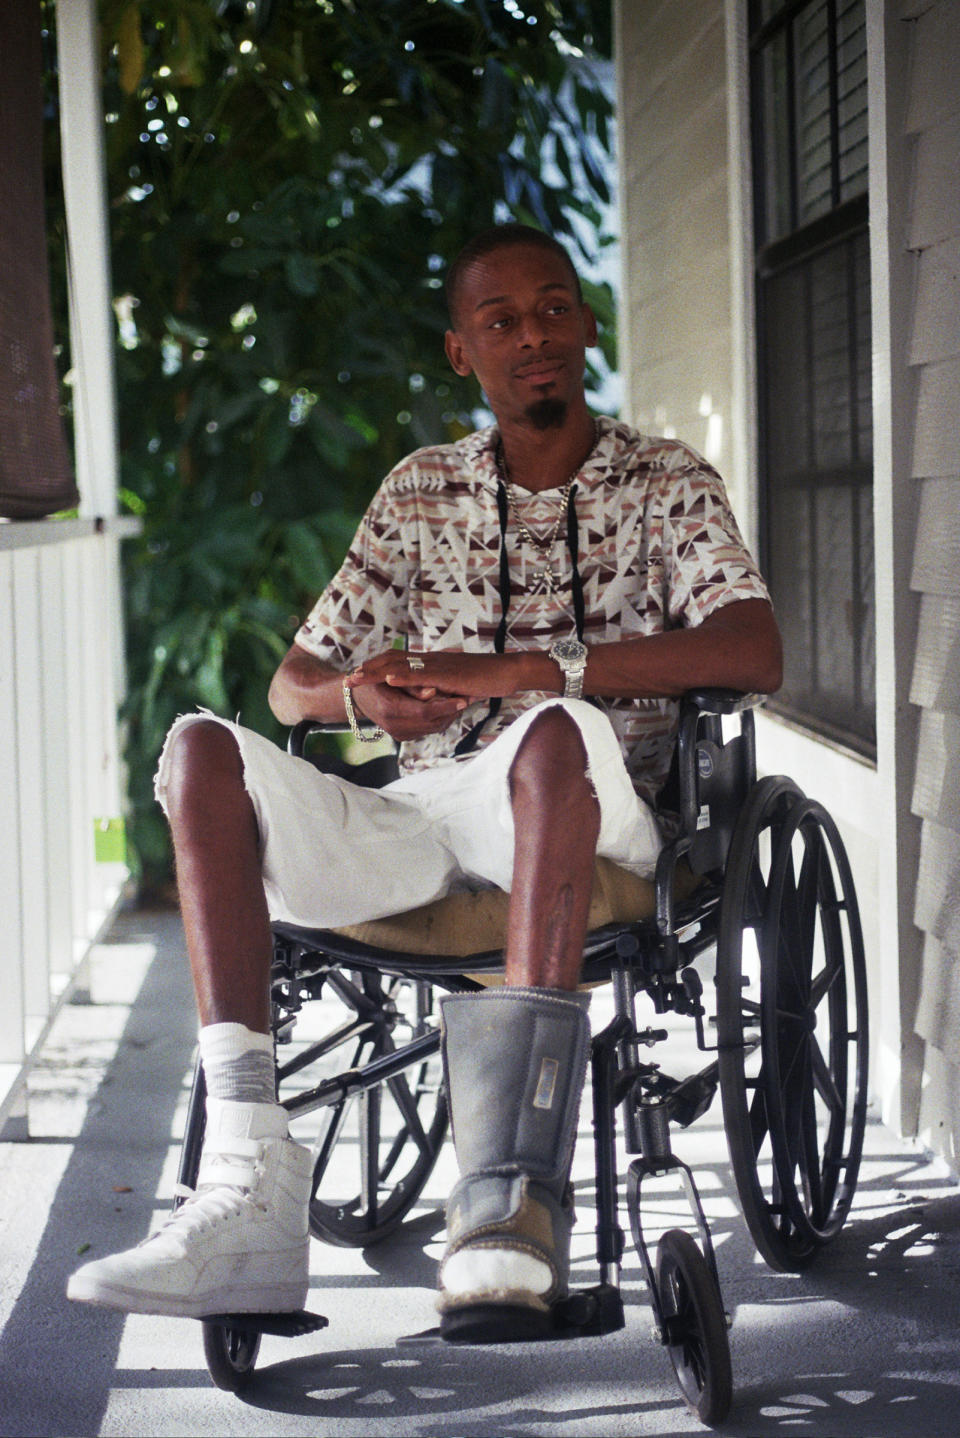 Florida shooting survivor Keinon Carter at his home in June 2017. | Joey Roulette